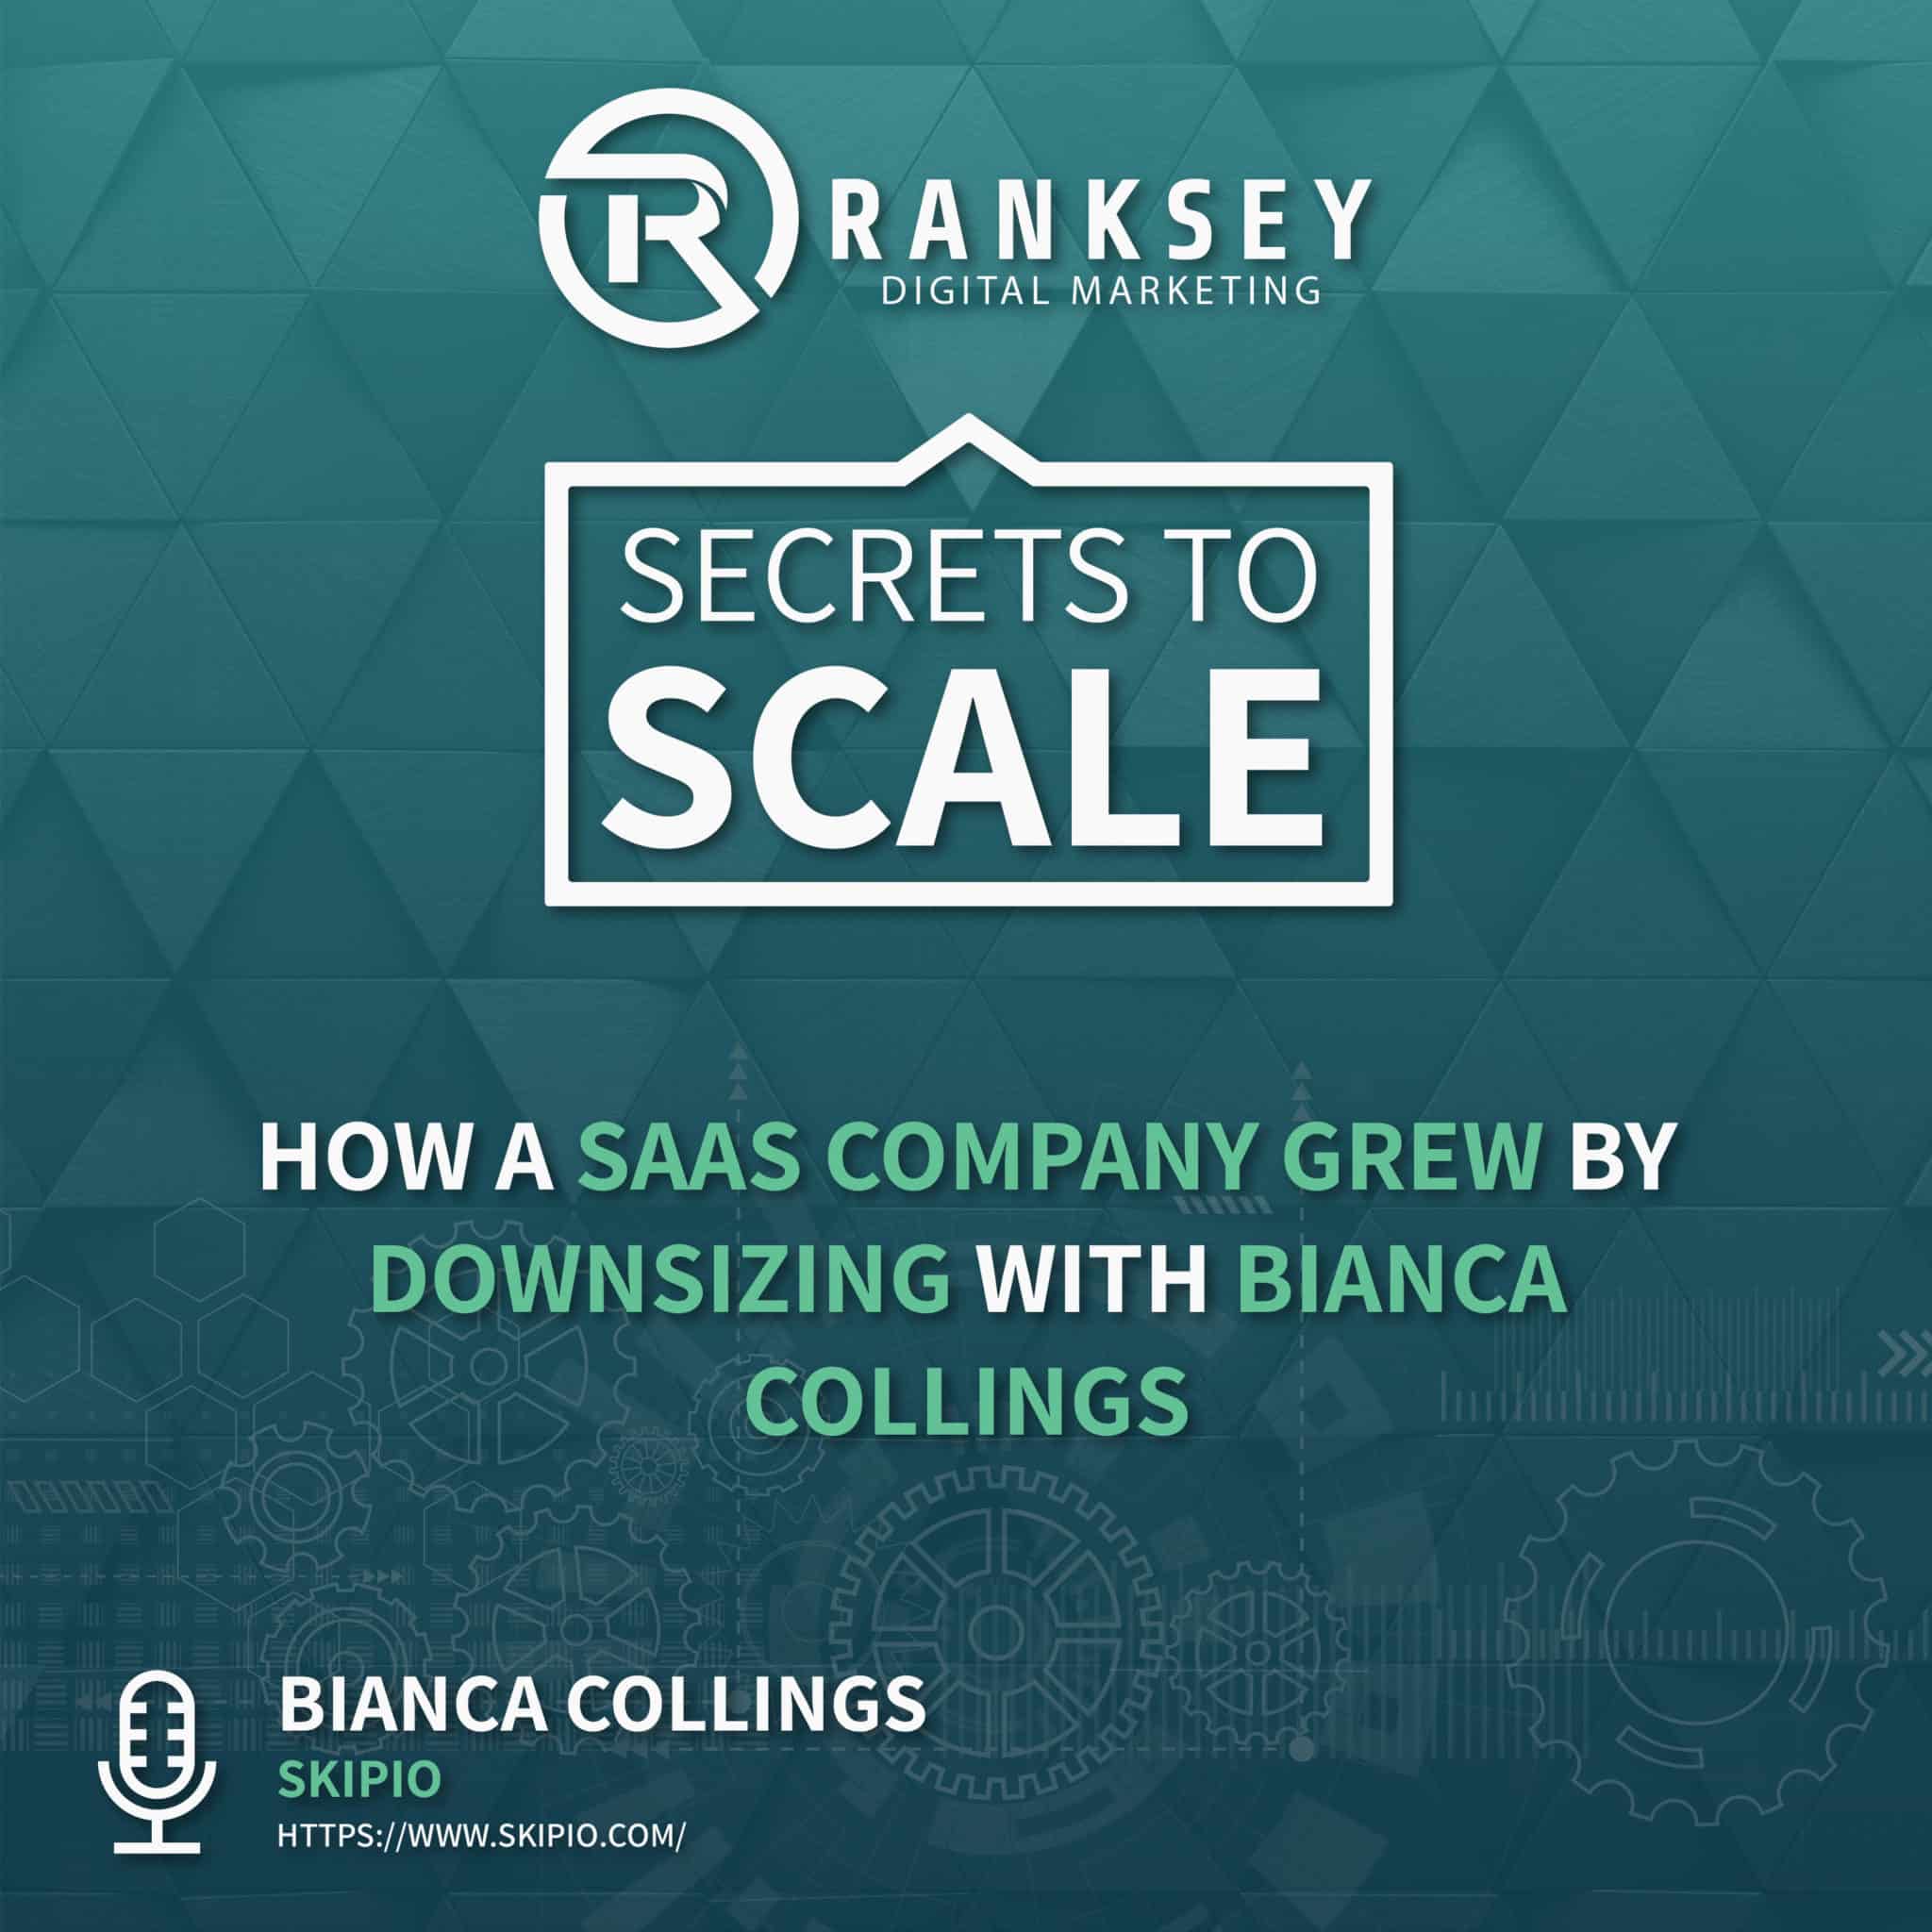 036 - How A SaaS Company Grew By Downsizing With Bianca Collings